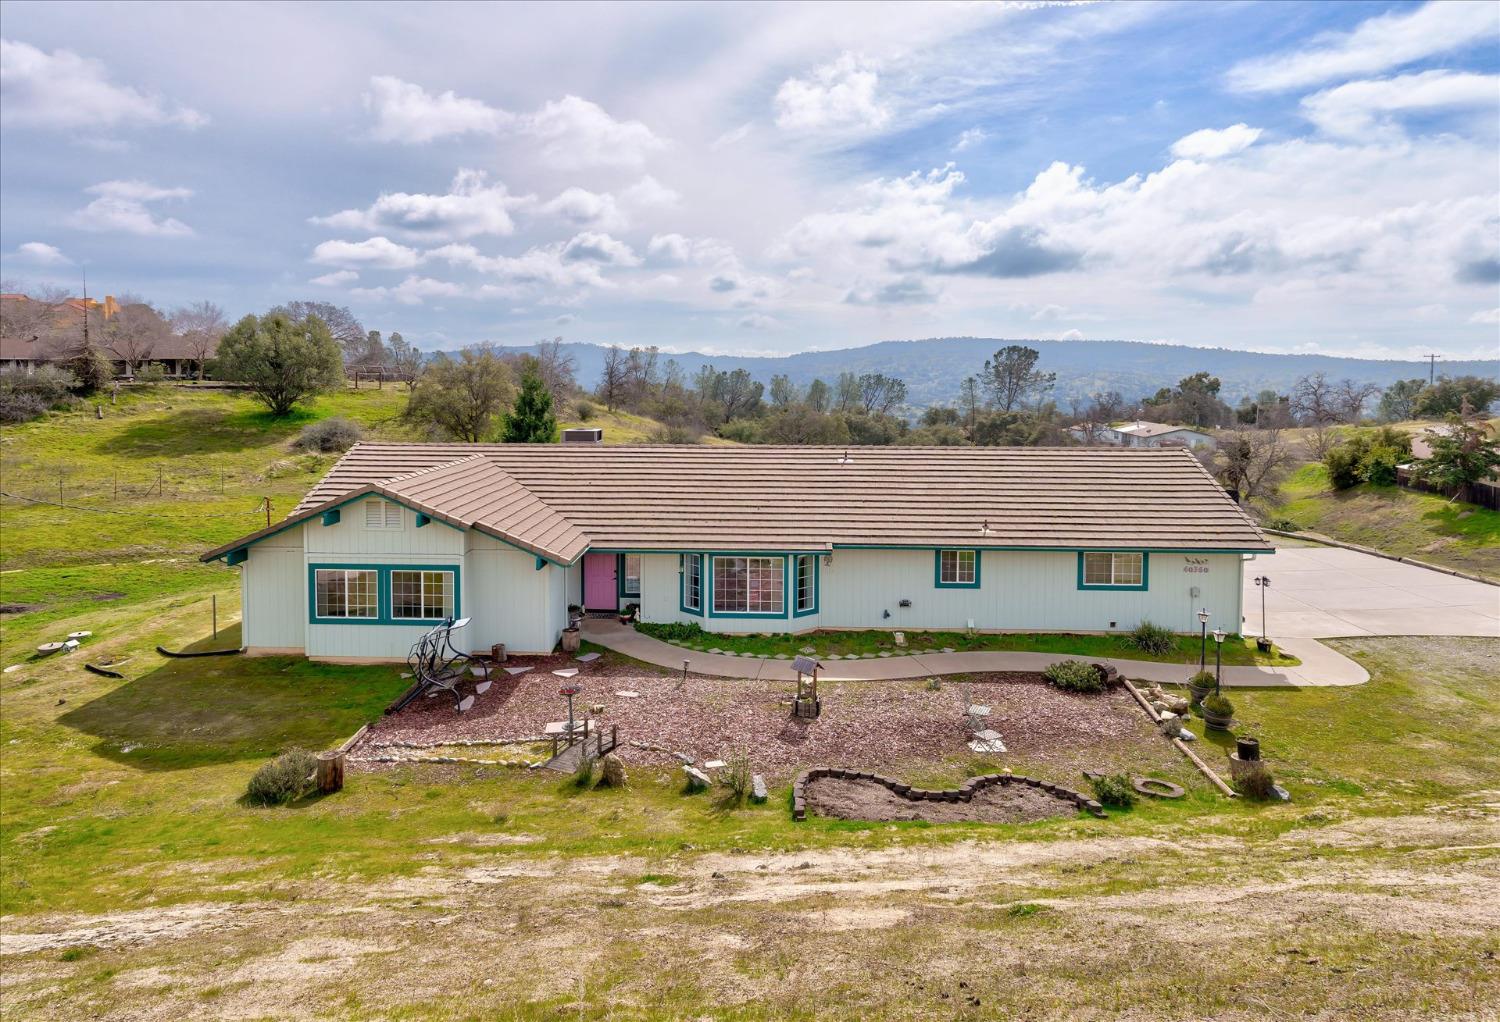 Photo of 40360 Lilley Mountain Dr in Coarsegold, CA